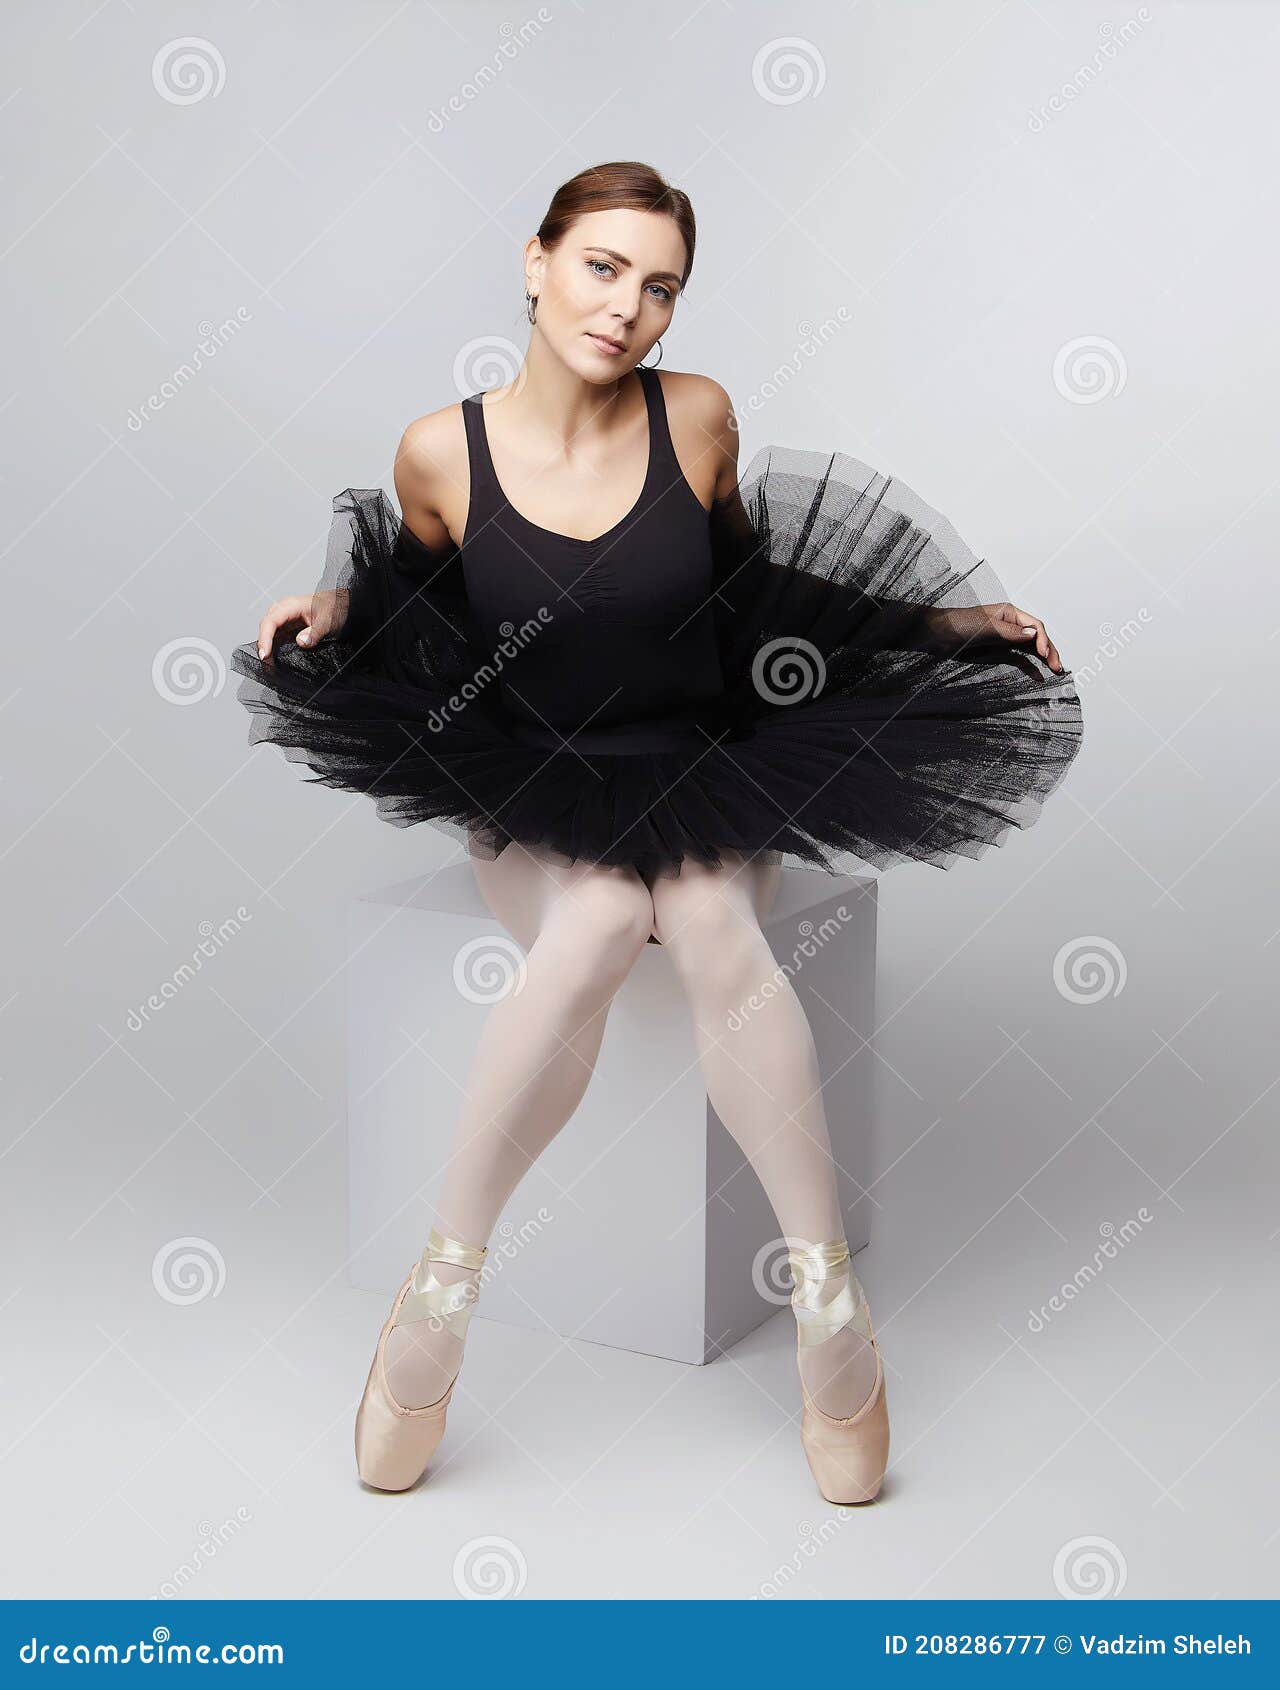 Attractive Ballerina Poses Gracefully while Sitting on a Cube. Photo Shoot in the Studio on a White Background Stock Image - Image of dance, 208286777